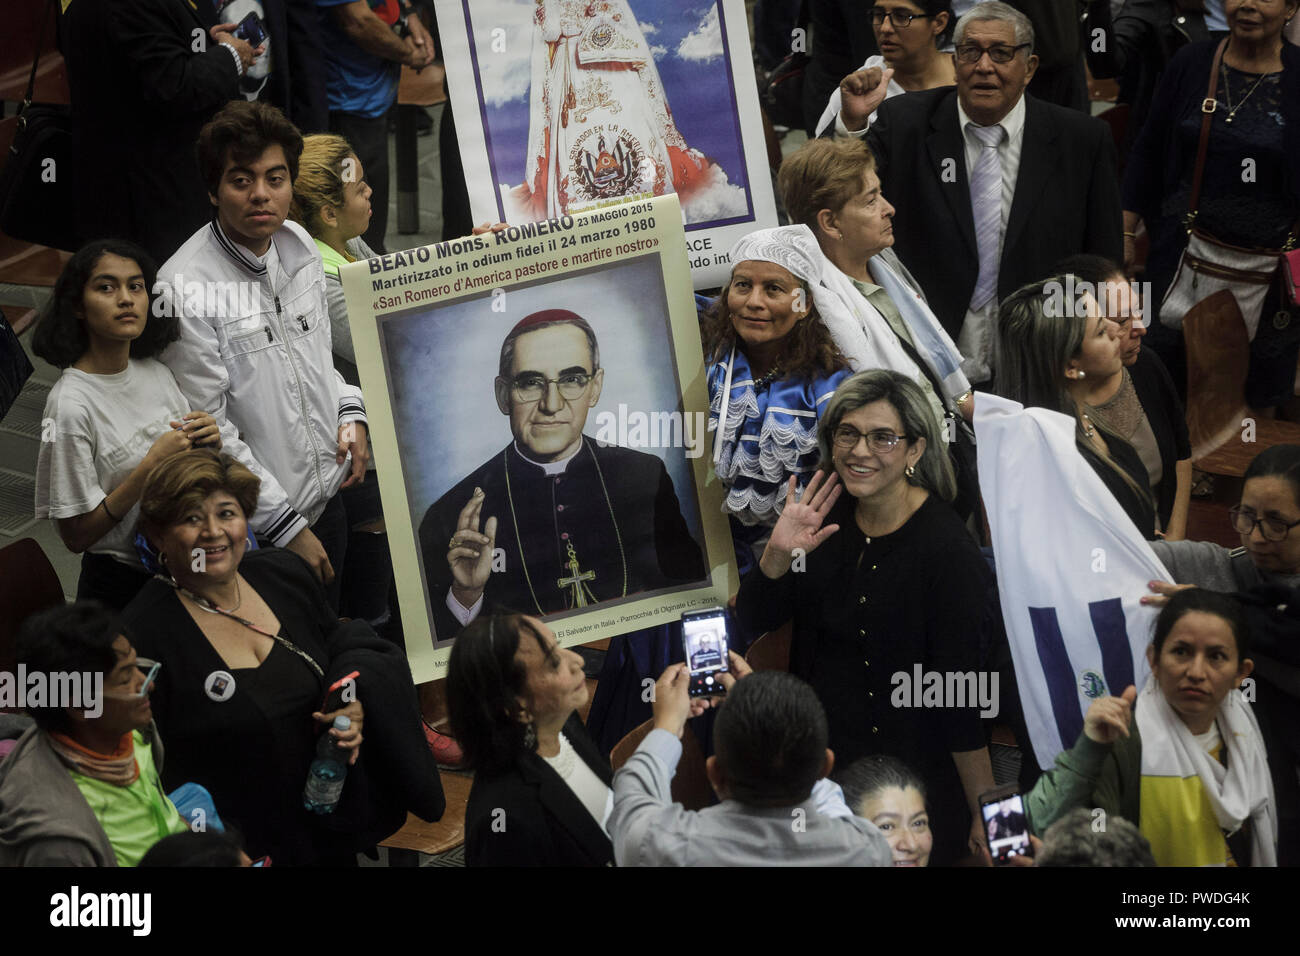 Vatican City, Vatican. 15th Oct, 2018. Pilgrims from El Salvador hold a poster of Salvadoran Archbishop Oscar Romero during an audience with Pope Francis for people from El Salvador in Paul VI Hall in Vatican City, Vatican on October 15, 2018. Pope Francis on Sunday canonized the martyred Salvadoran Archbishop Oscar Romero, one of the most important and contested figure of the 20th-century Catholic Church. Credit: Giuseppe Ciccia/Pacific Press/Alamy Live News Stock Photo